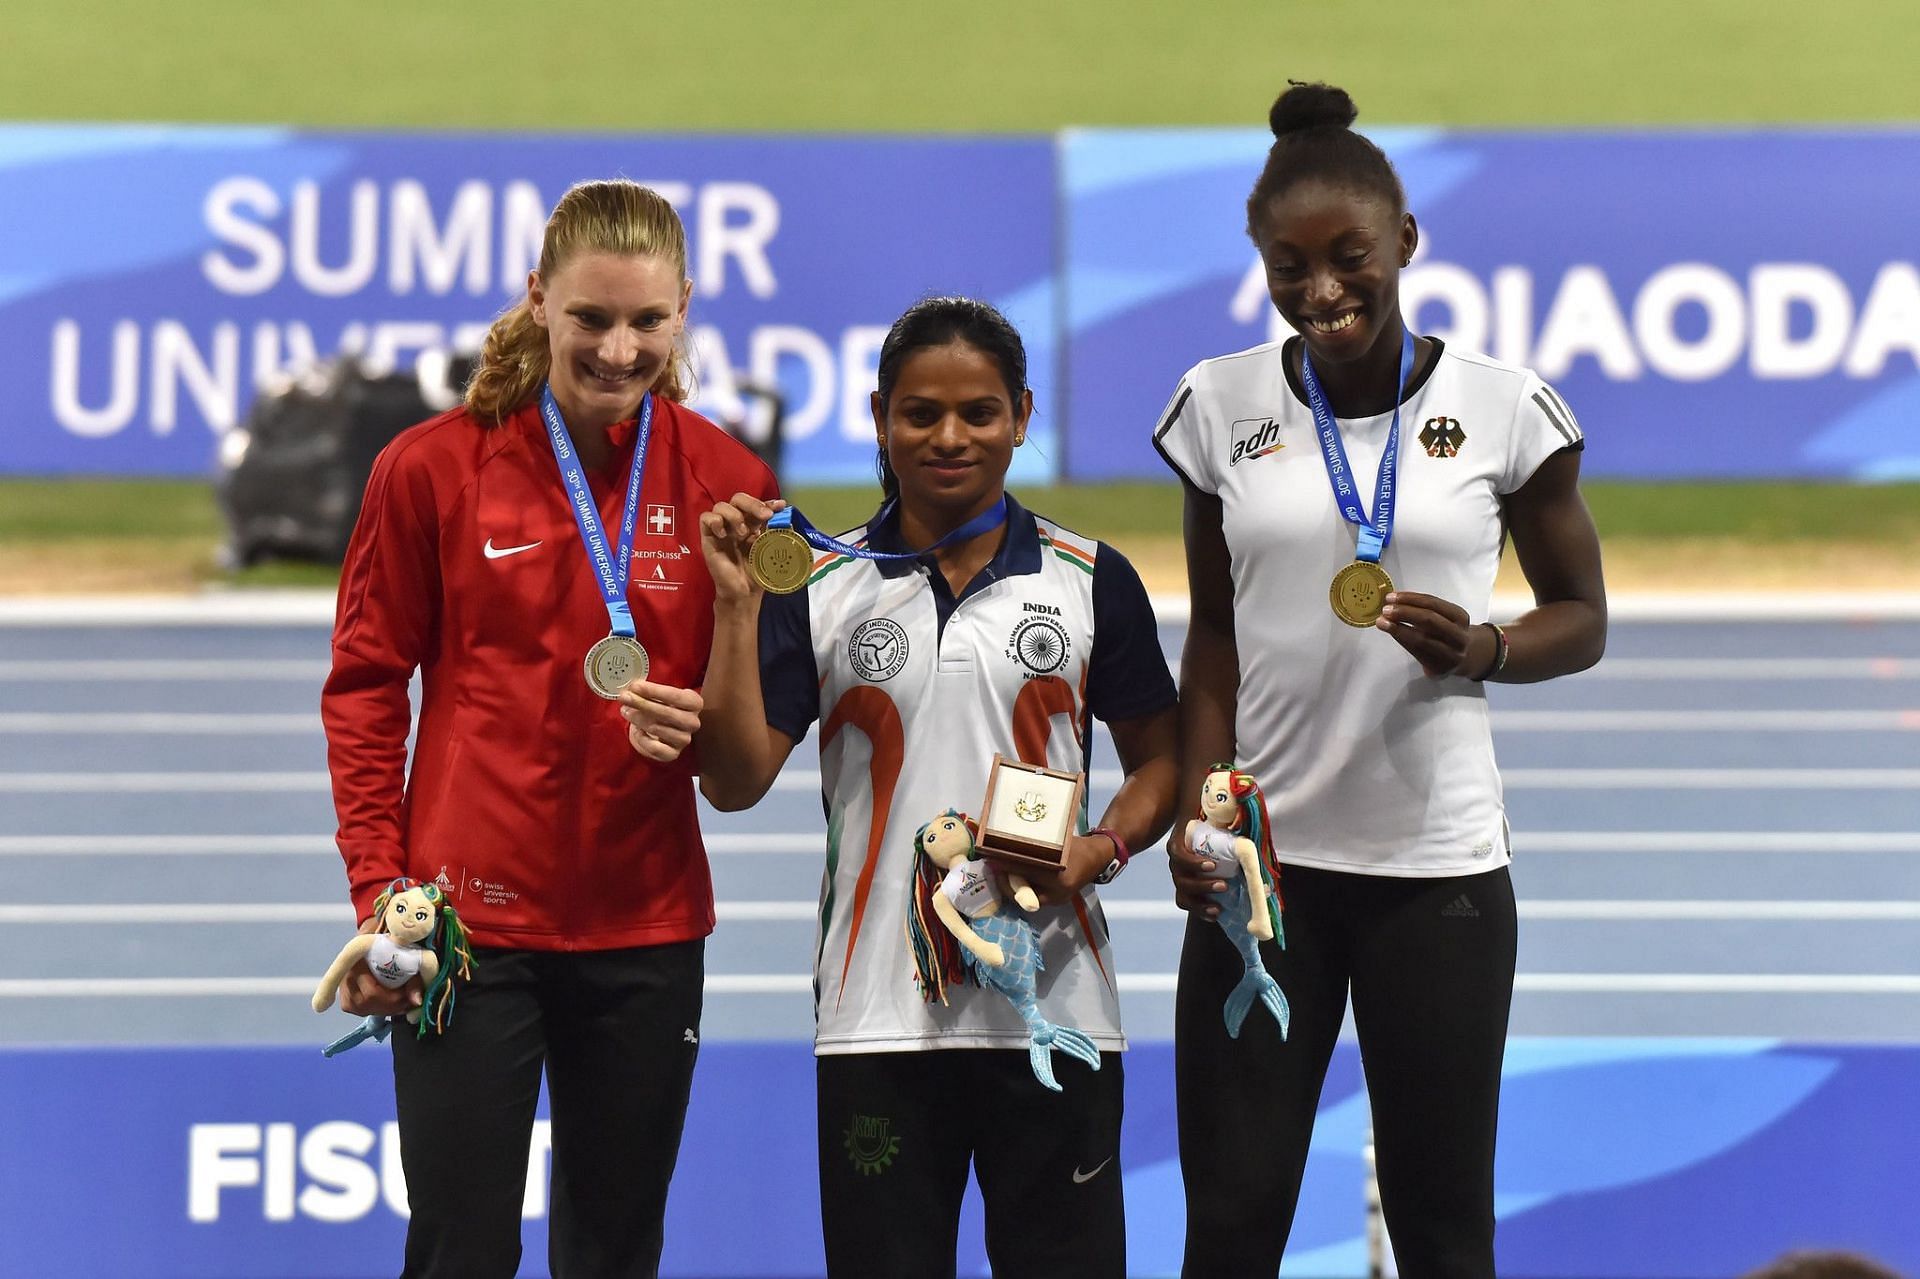 India&#039;s Dutee Chand after winning gold in the women&#039;s 100m final of the 2019 World University Games in Napoli | Image: FISU